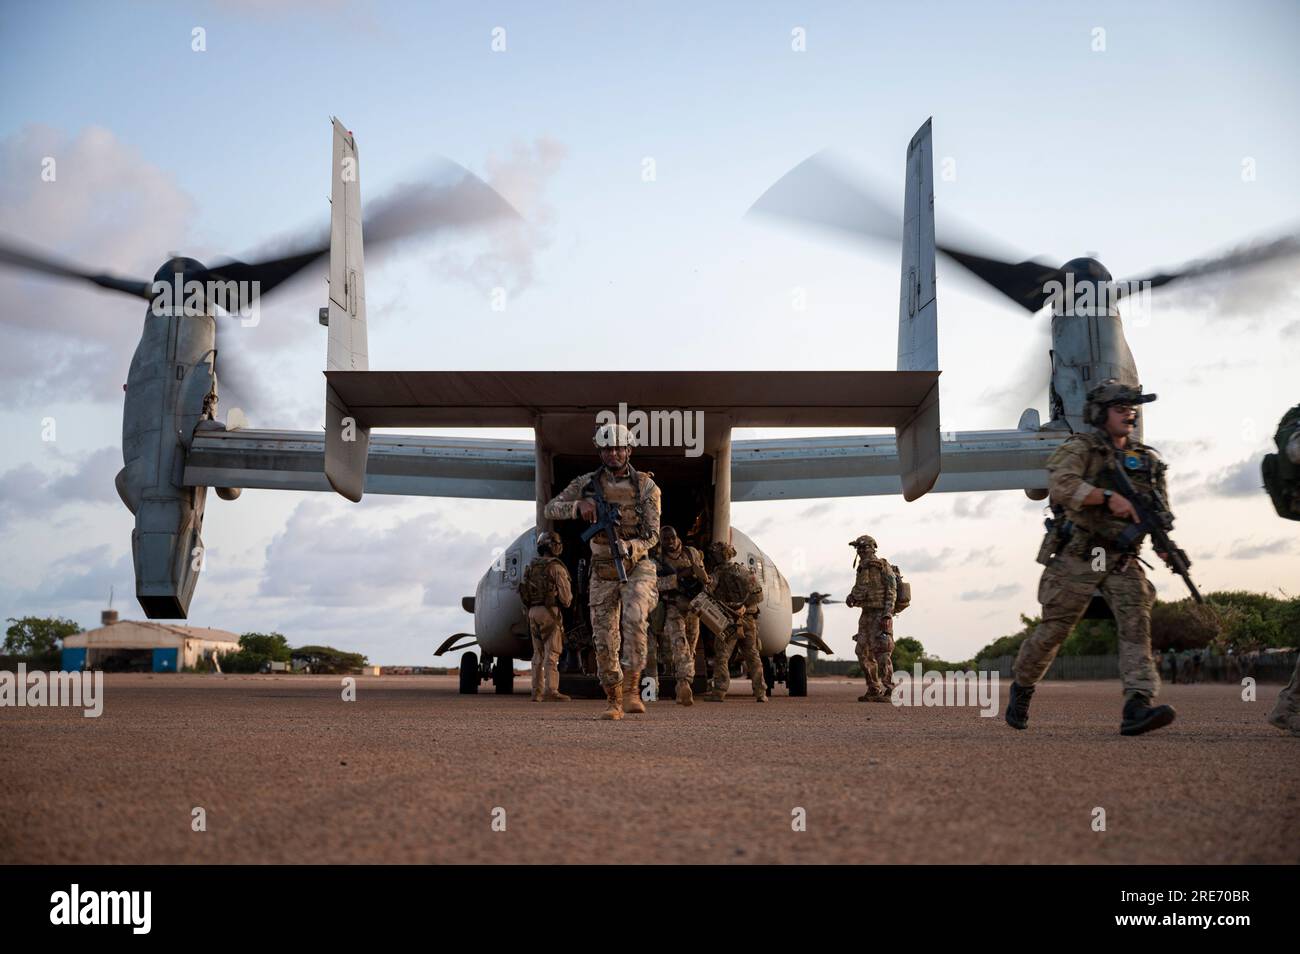 Obolus Javelin Commandos and U.S. Special Operations Forces practice tactics, training and procedures before boarding an MV-22 Osprey to conduct an operation at Kismayo, Somalia, June 12, 2023. U.S. forces provide remote advise and assist support to Somali National Army Danab Forces to increase regional security and stability in the Horn of Africa. (U.S. Air Force photo by Staff Sgt. Enrique Barcelo) Stock Photo